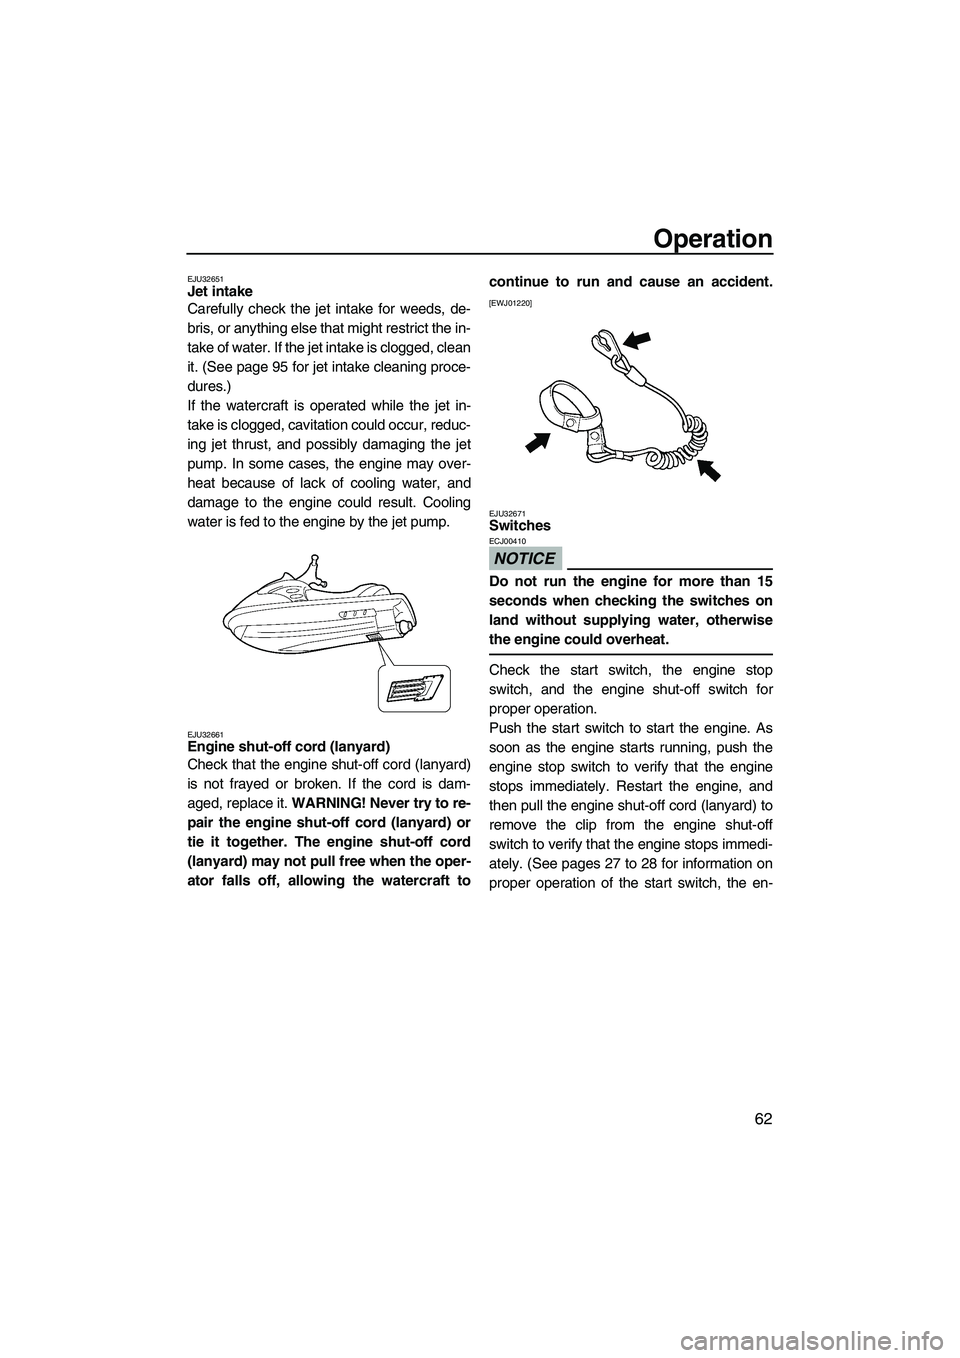 YAMAHA SVHO 2009  Owners Manual Operation
62
EJU32651Jet intake 
Carefully check the jet intake for weeds, de-
bris, or anything else that might restrict the in-
take of water. If the jet intake is clogged, clean
it. (See page 95 fo